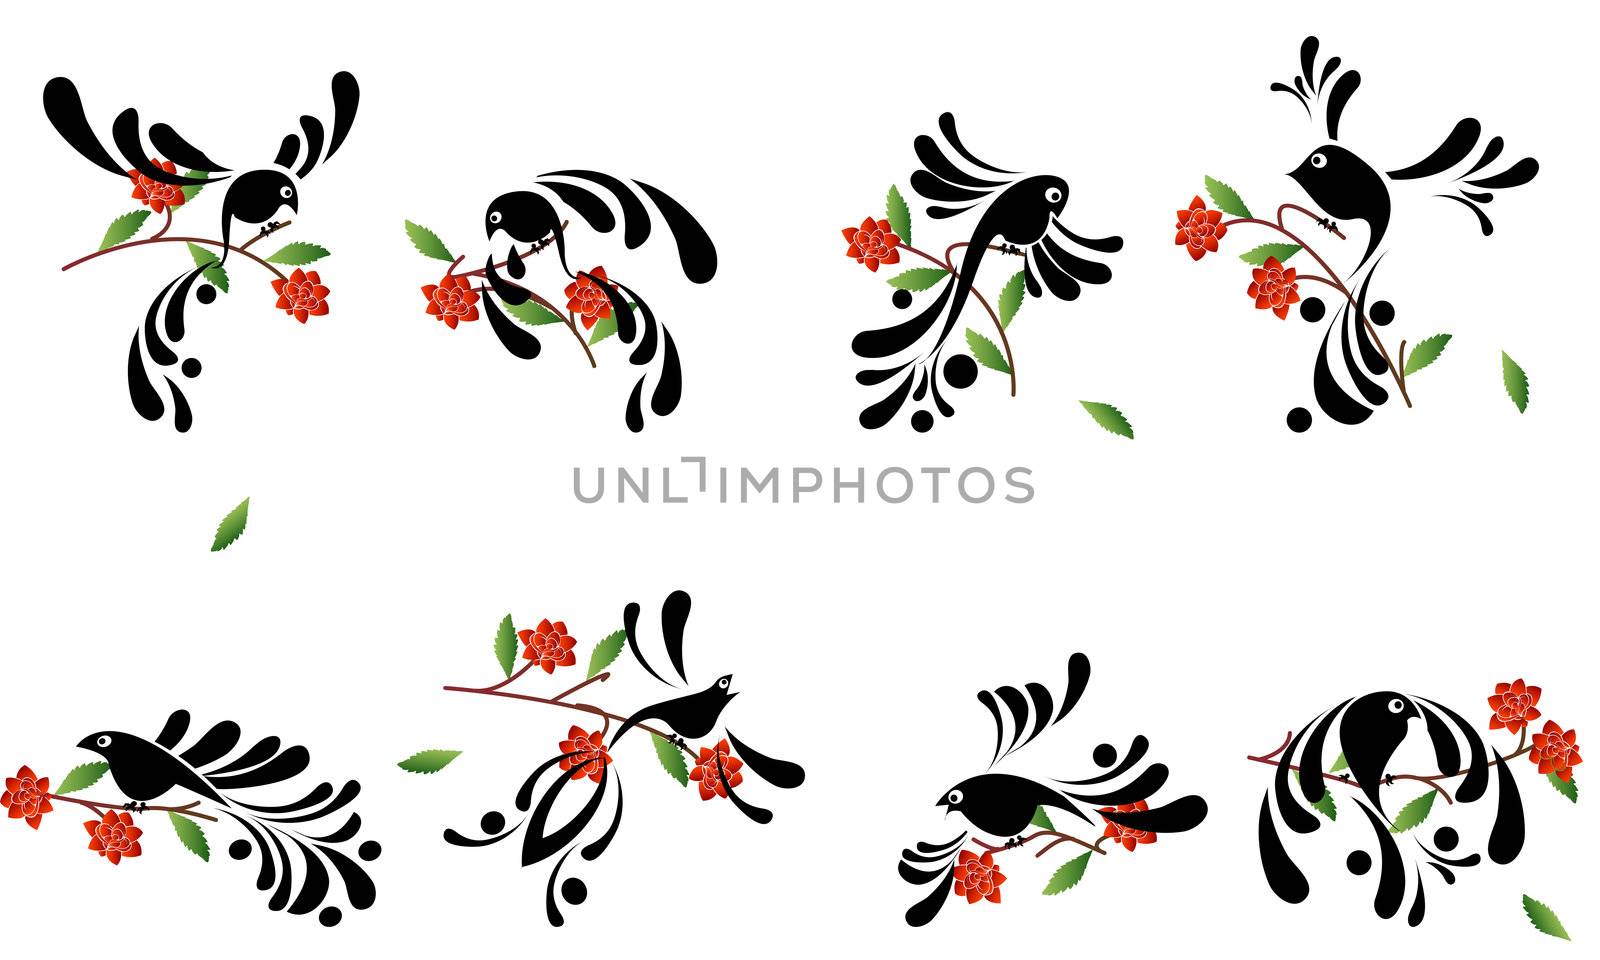 Stylized birds collection, isolated and grouped objects on white